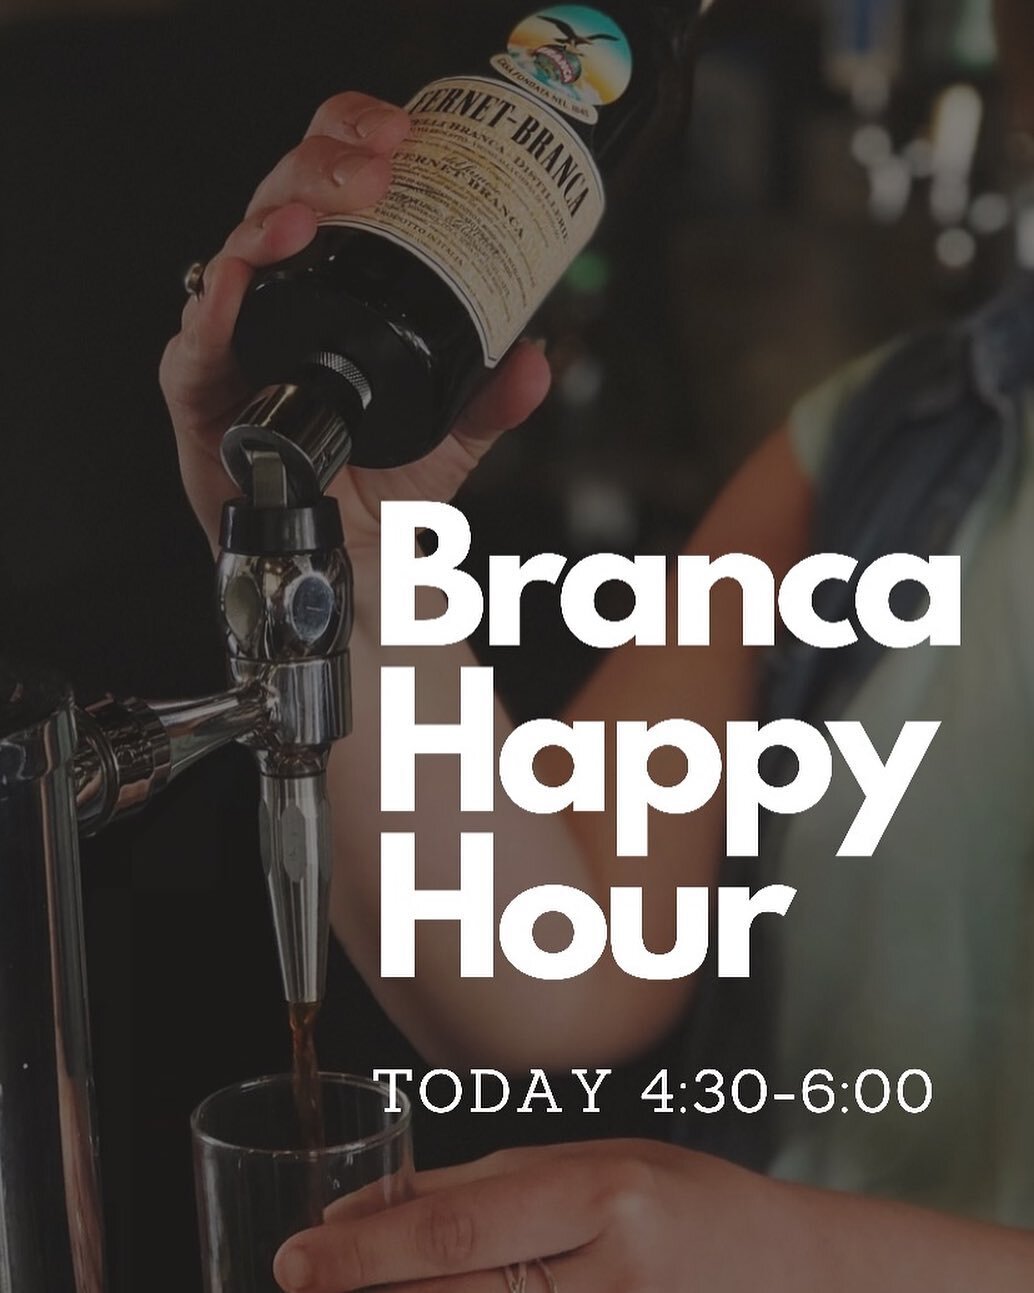 Join us today for a Branca Happy Hour hosted by our friends at @vintegrity! Stop in, try a sample, and stay for one of our featured cocktails!